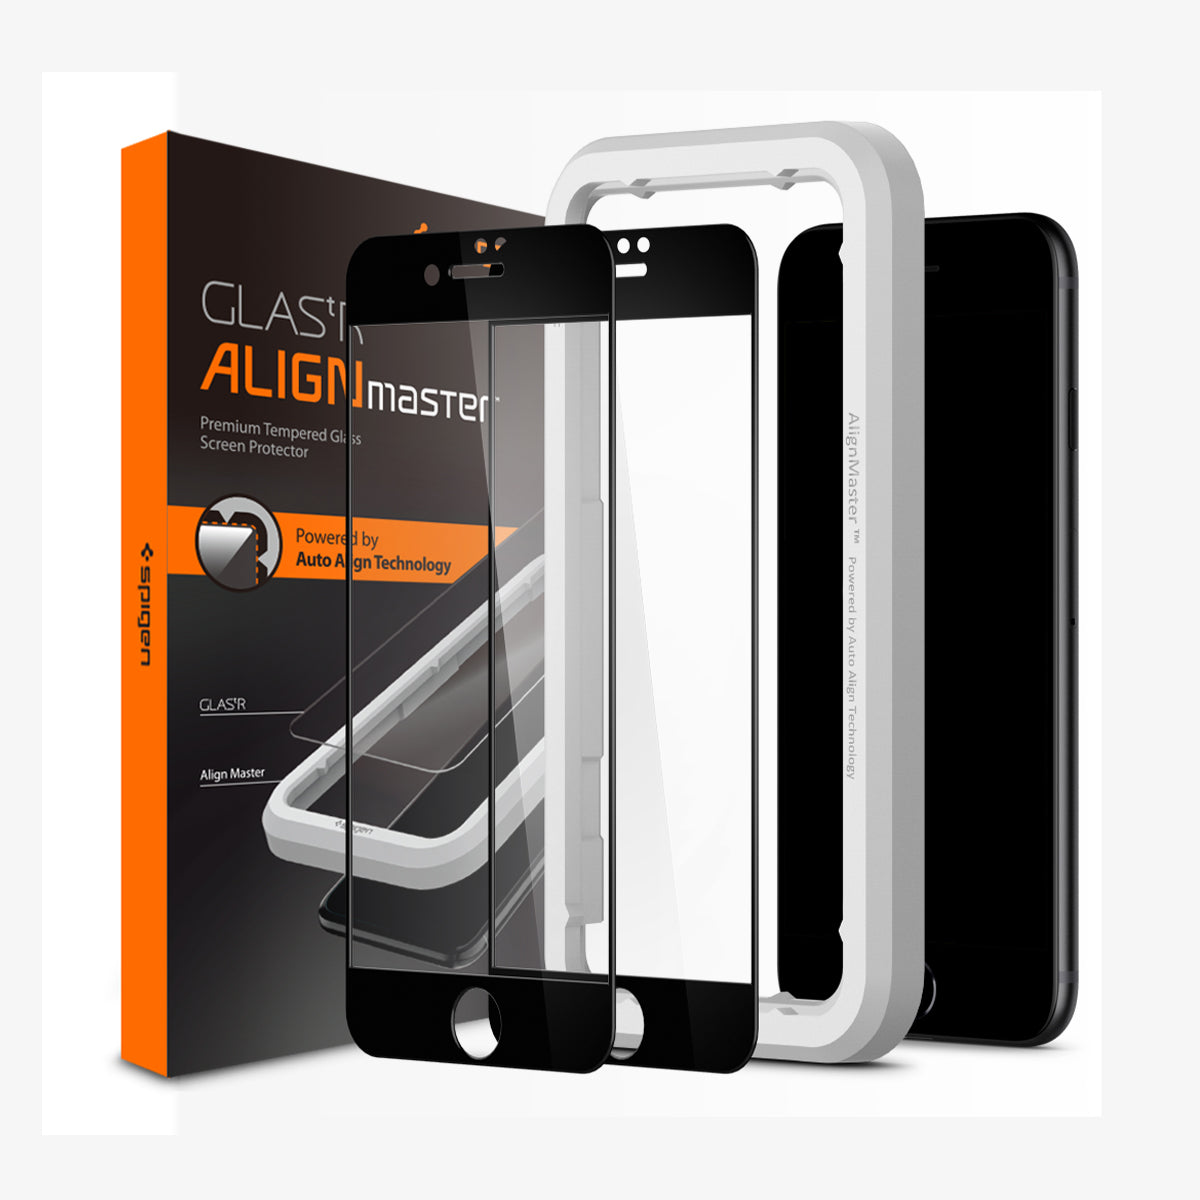 iPhone 11 Black with Spigen Ultra Hybrid Crystal Clear Case : r/iPhone11